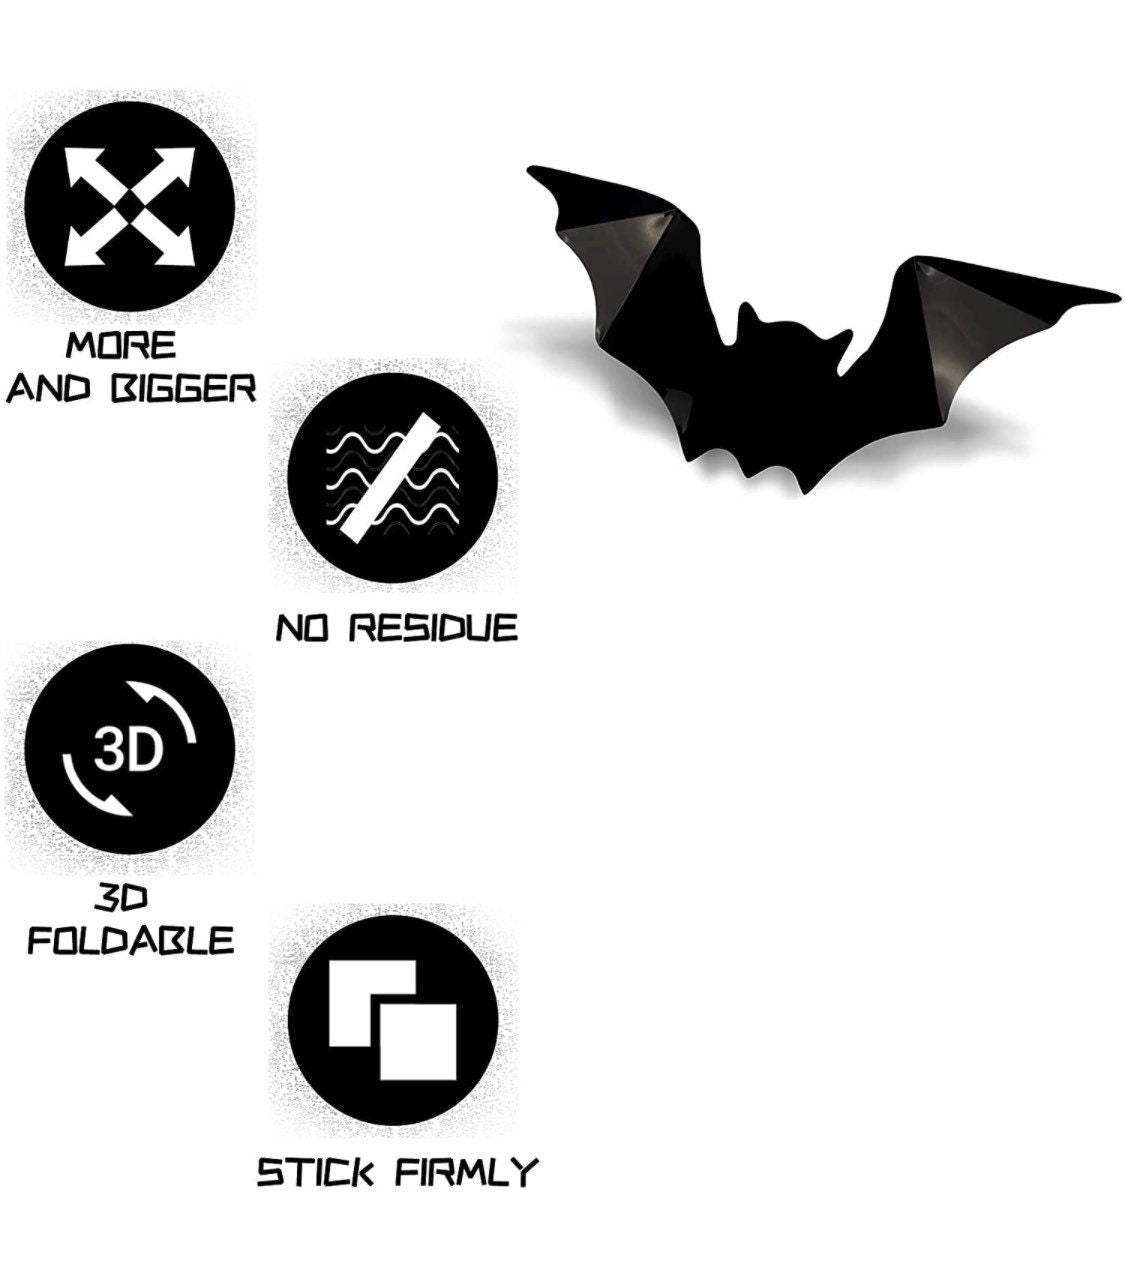 Bat Halloween Decorations - 3D Bats with Non marking tape for walls, hanging, Crafts and spider webs